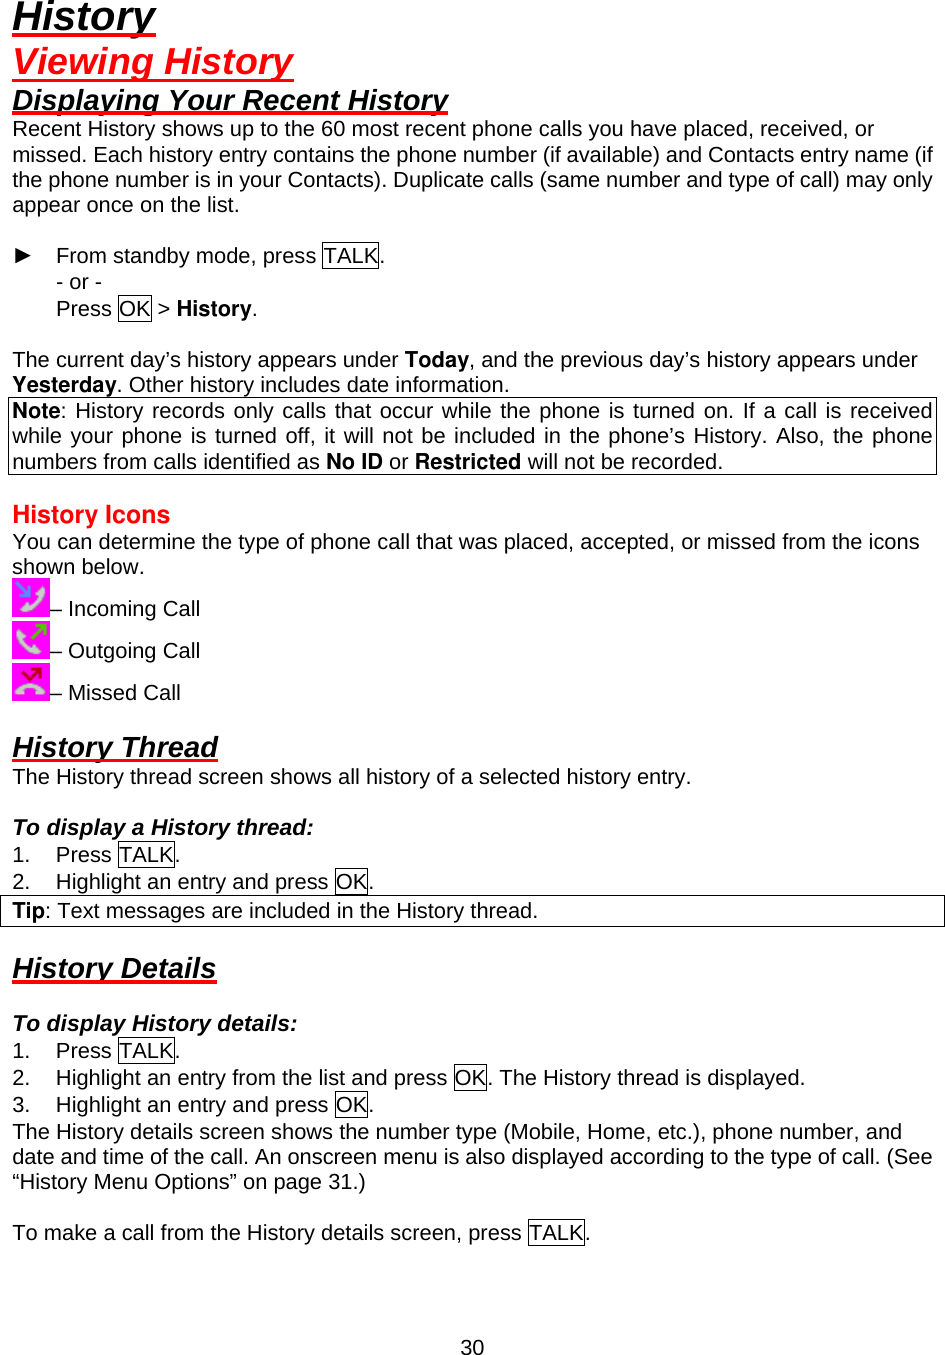  30History Viewing History Displaying Your Recent History Recent History shows up to the 60 most recent phone calls you have placed, received, or missed. Each history entry contains the phone number (if available) and Contacts entry name (if the phone number is in your Contacts). Duplicate calls (same number and type of call) may only appear once on the list.  ► From standby mode, press TALK. - or - Press OK &gt; History.  The current day’s history appears under Today, and the previous day’s history appears under Yesterday. Other history includes date information. Note: History records only calls that occur while the phone is turned on. If a call is received while your phone is turned off, it will not be included in the phone’s History. Also, the phone numbers from calls identified as No ID or Restricted will not be recorded.  History Icons You can determine the type of phone call that was placed, accepted, or missed from the icons shown below. – Incoming Call – Outgoing Call – Missed Call  History Thread The History thread screen shows all history of a selected history entry.  To display a History thread: 1. Press TALK. 2.  Highlight an entry and press OK. Tip: Text messages are included in the History thread.  History Details  To display History details: 1. Press TALK. 2.  Highlight an entry from the list and press OK. The History thread is displayed. 3.  Highlight an entry and press OK. The History details screen shows the number type (Mobile, Home, etc.), phone number, and date and time of the call. An onscreen menu is also displayed according to the type of call. (See “History Menu Options” on page 31.)  To make a call from the History details screen, press TALK. 